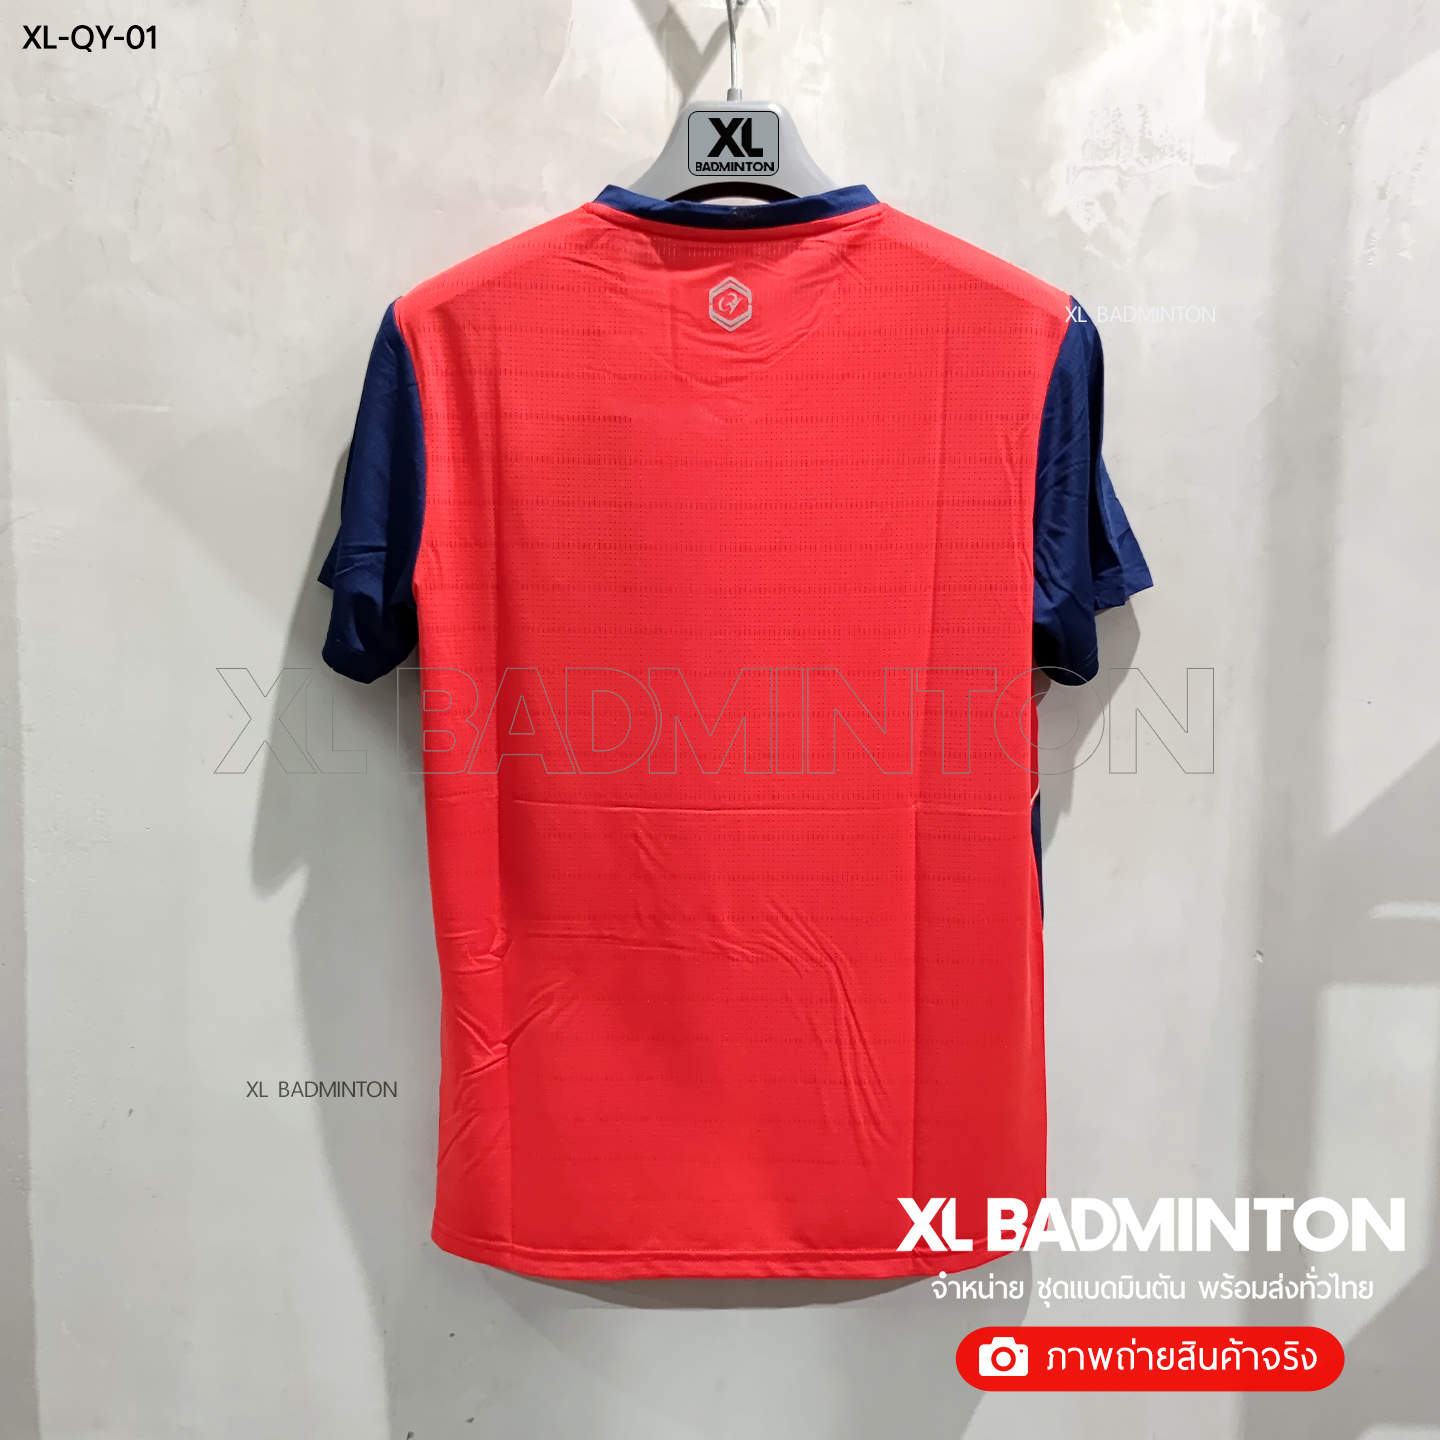 xl-qy-01-red-3